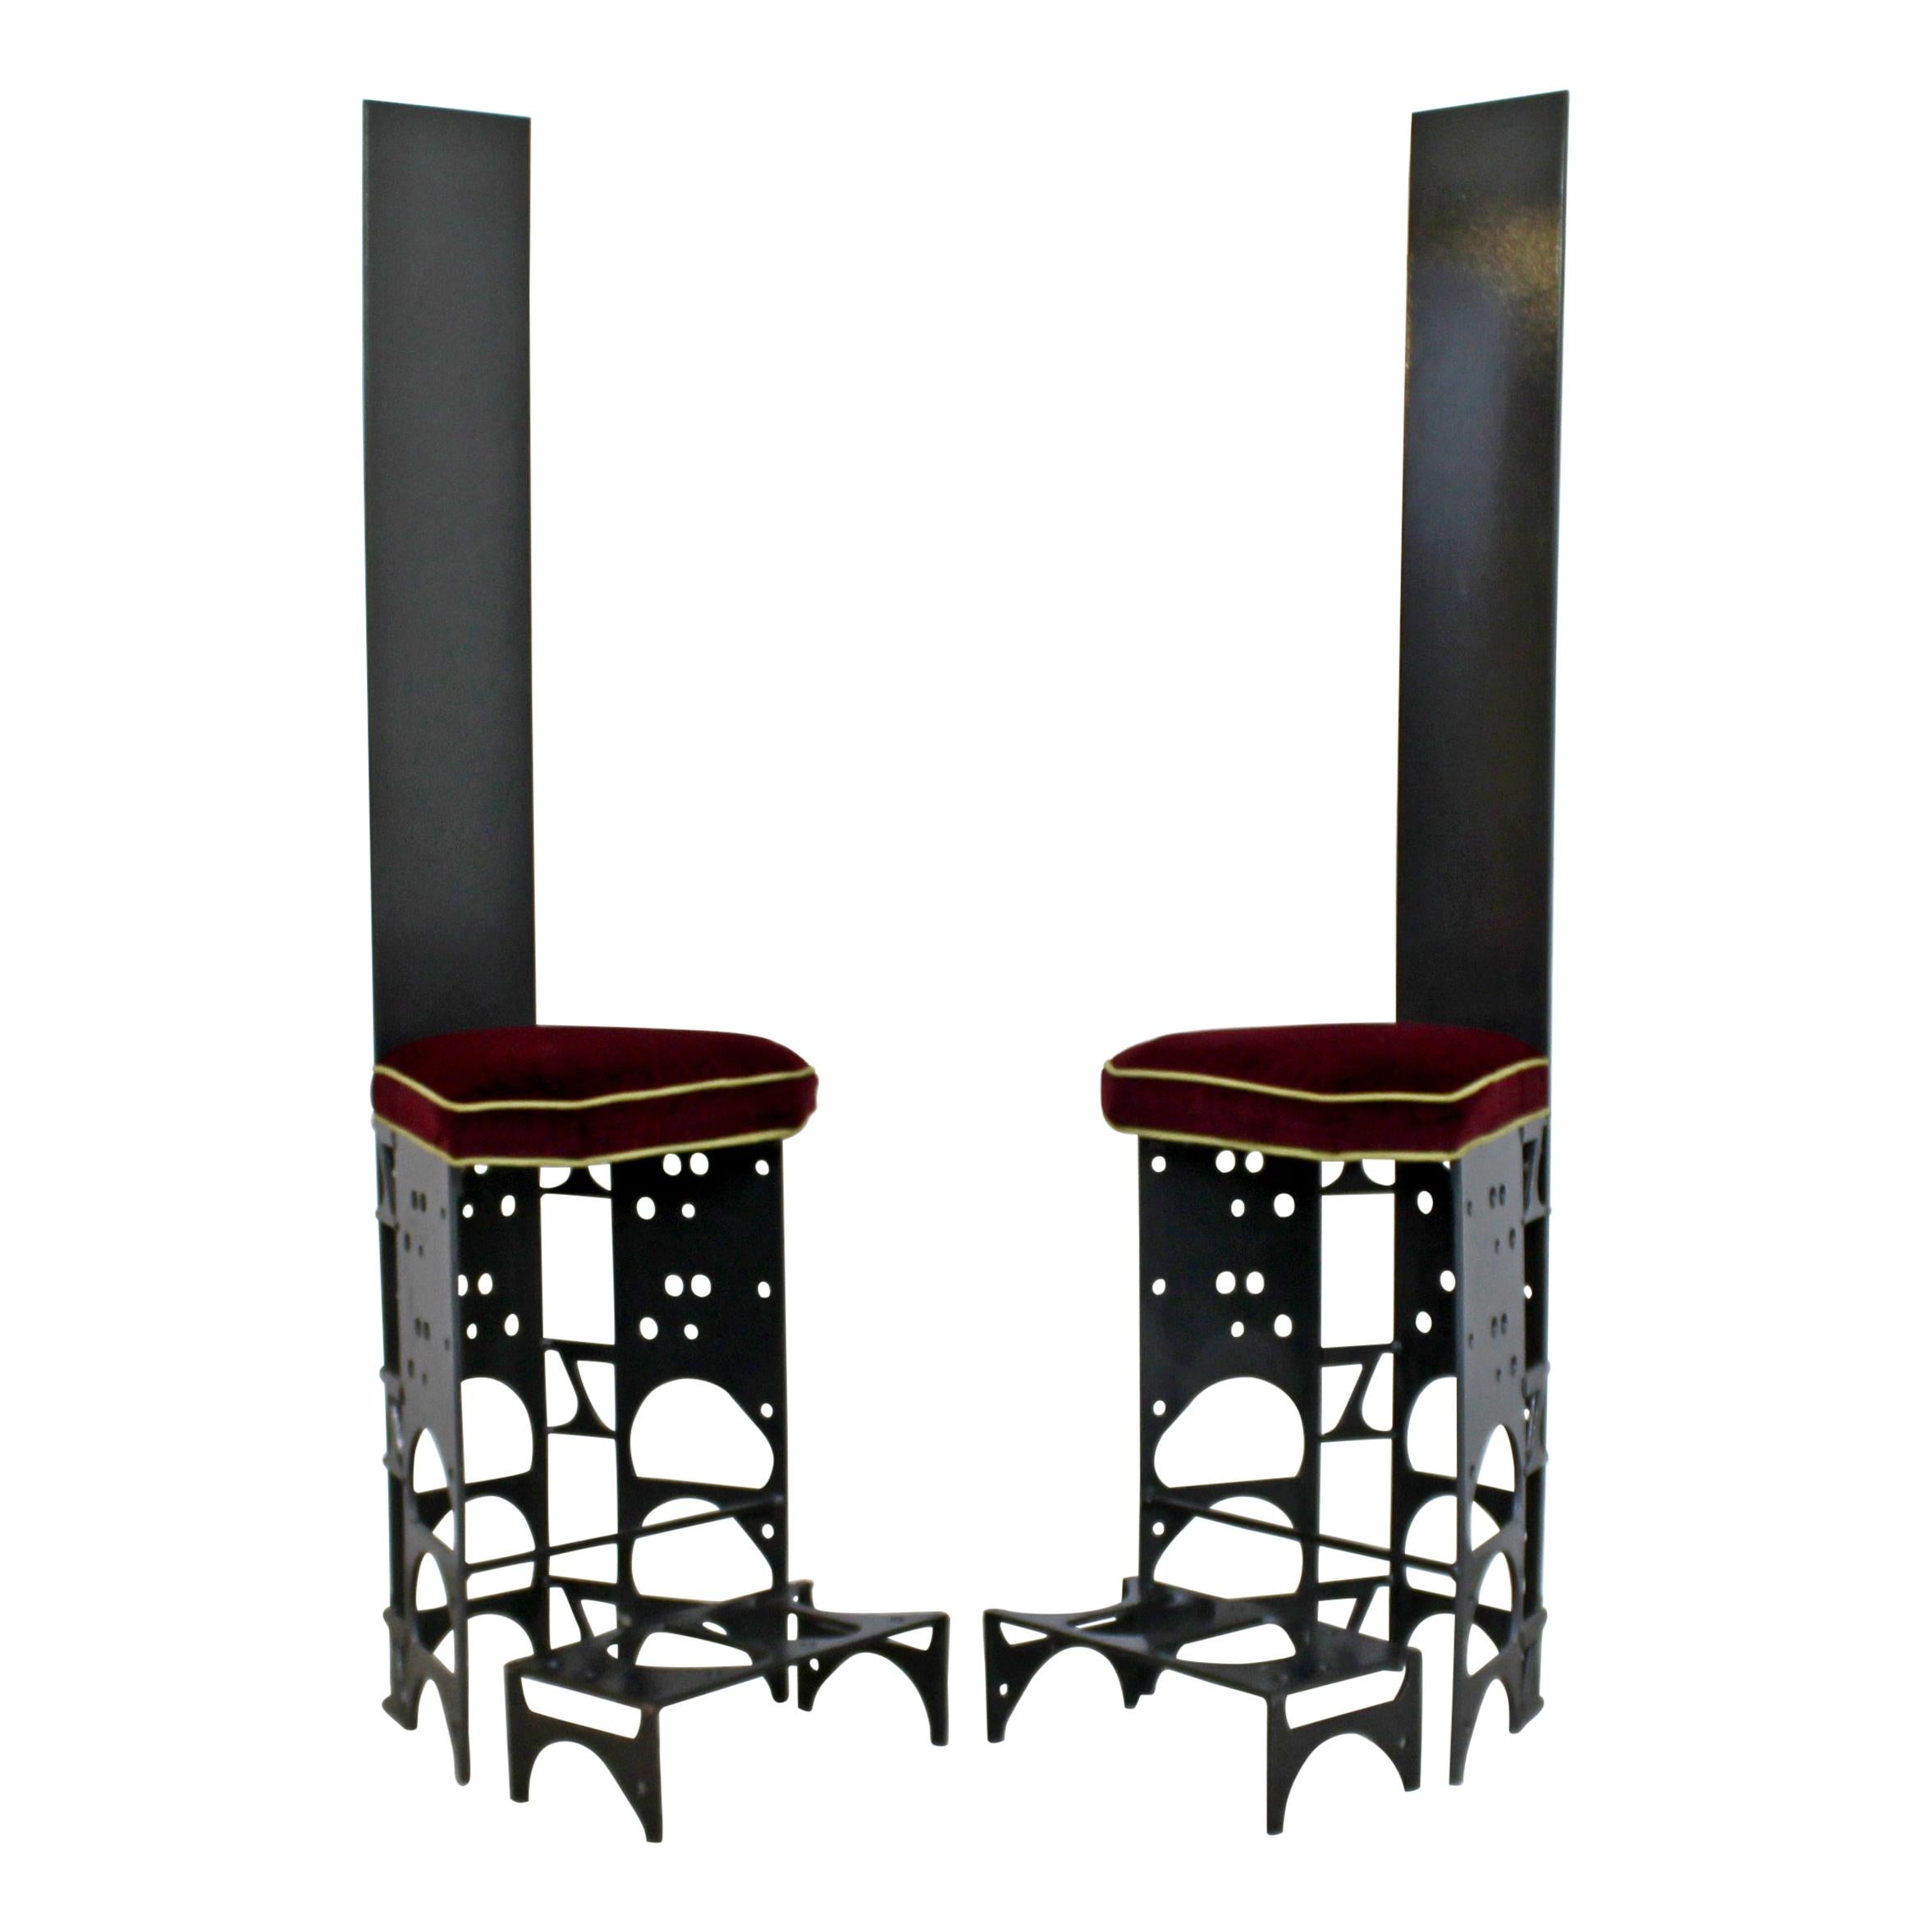 Contemporary Modern Ironsworks King and Queen Pair of Iron Art Chairs & Ottomans